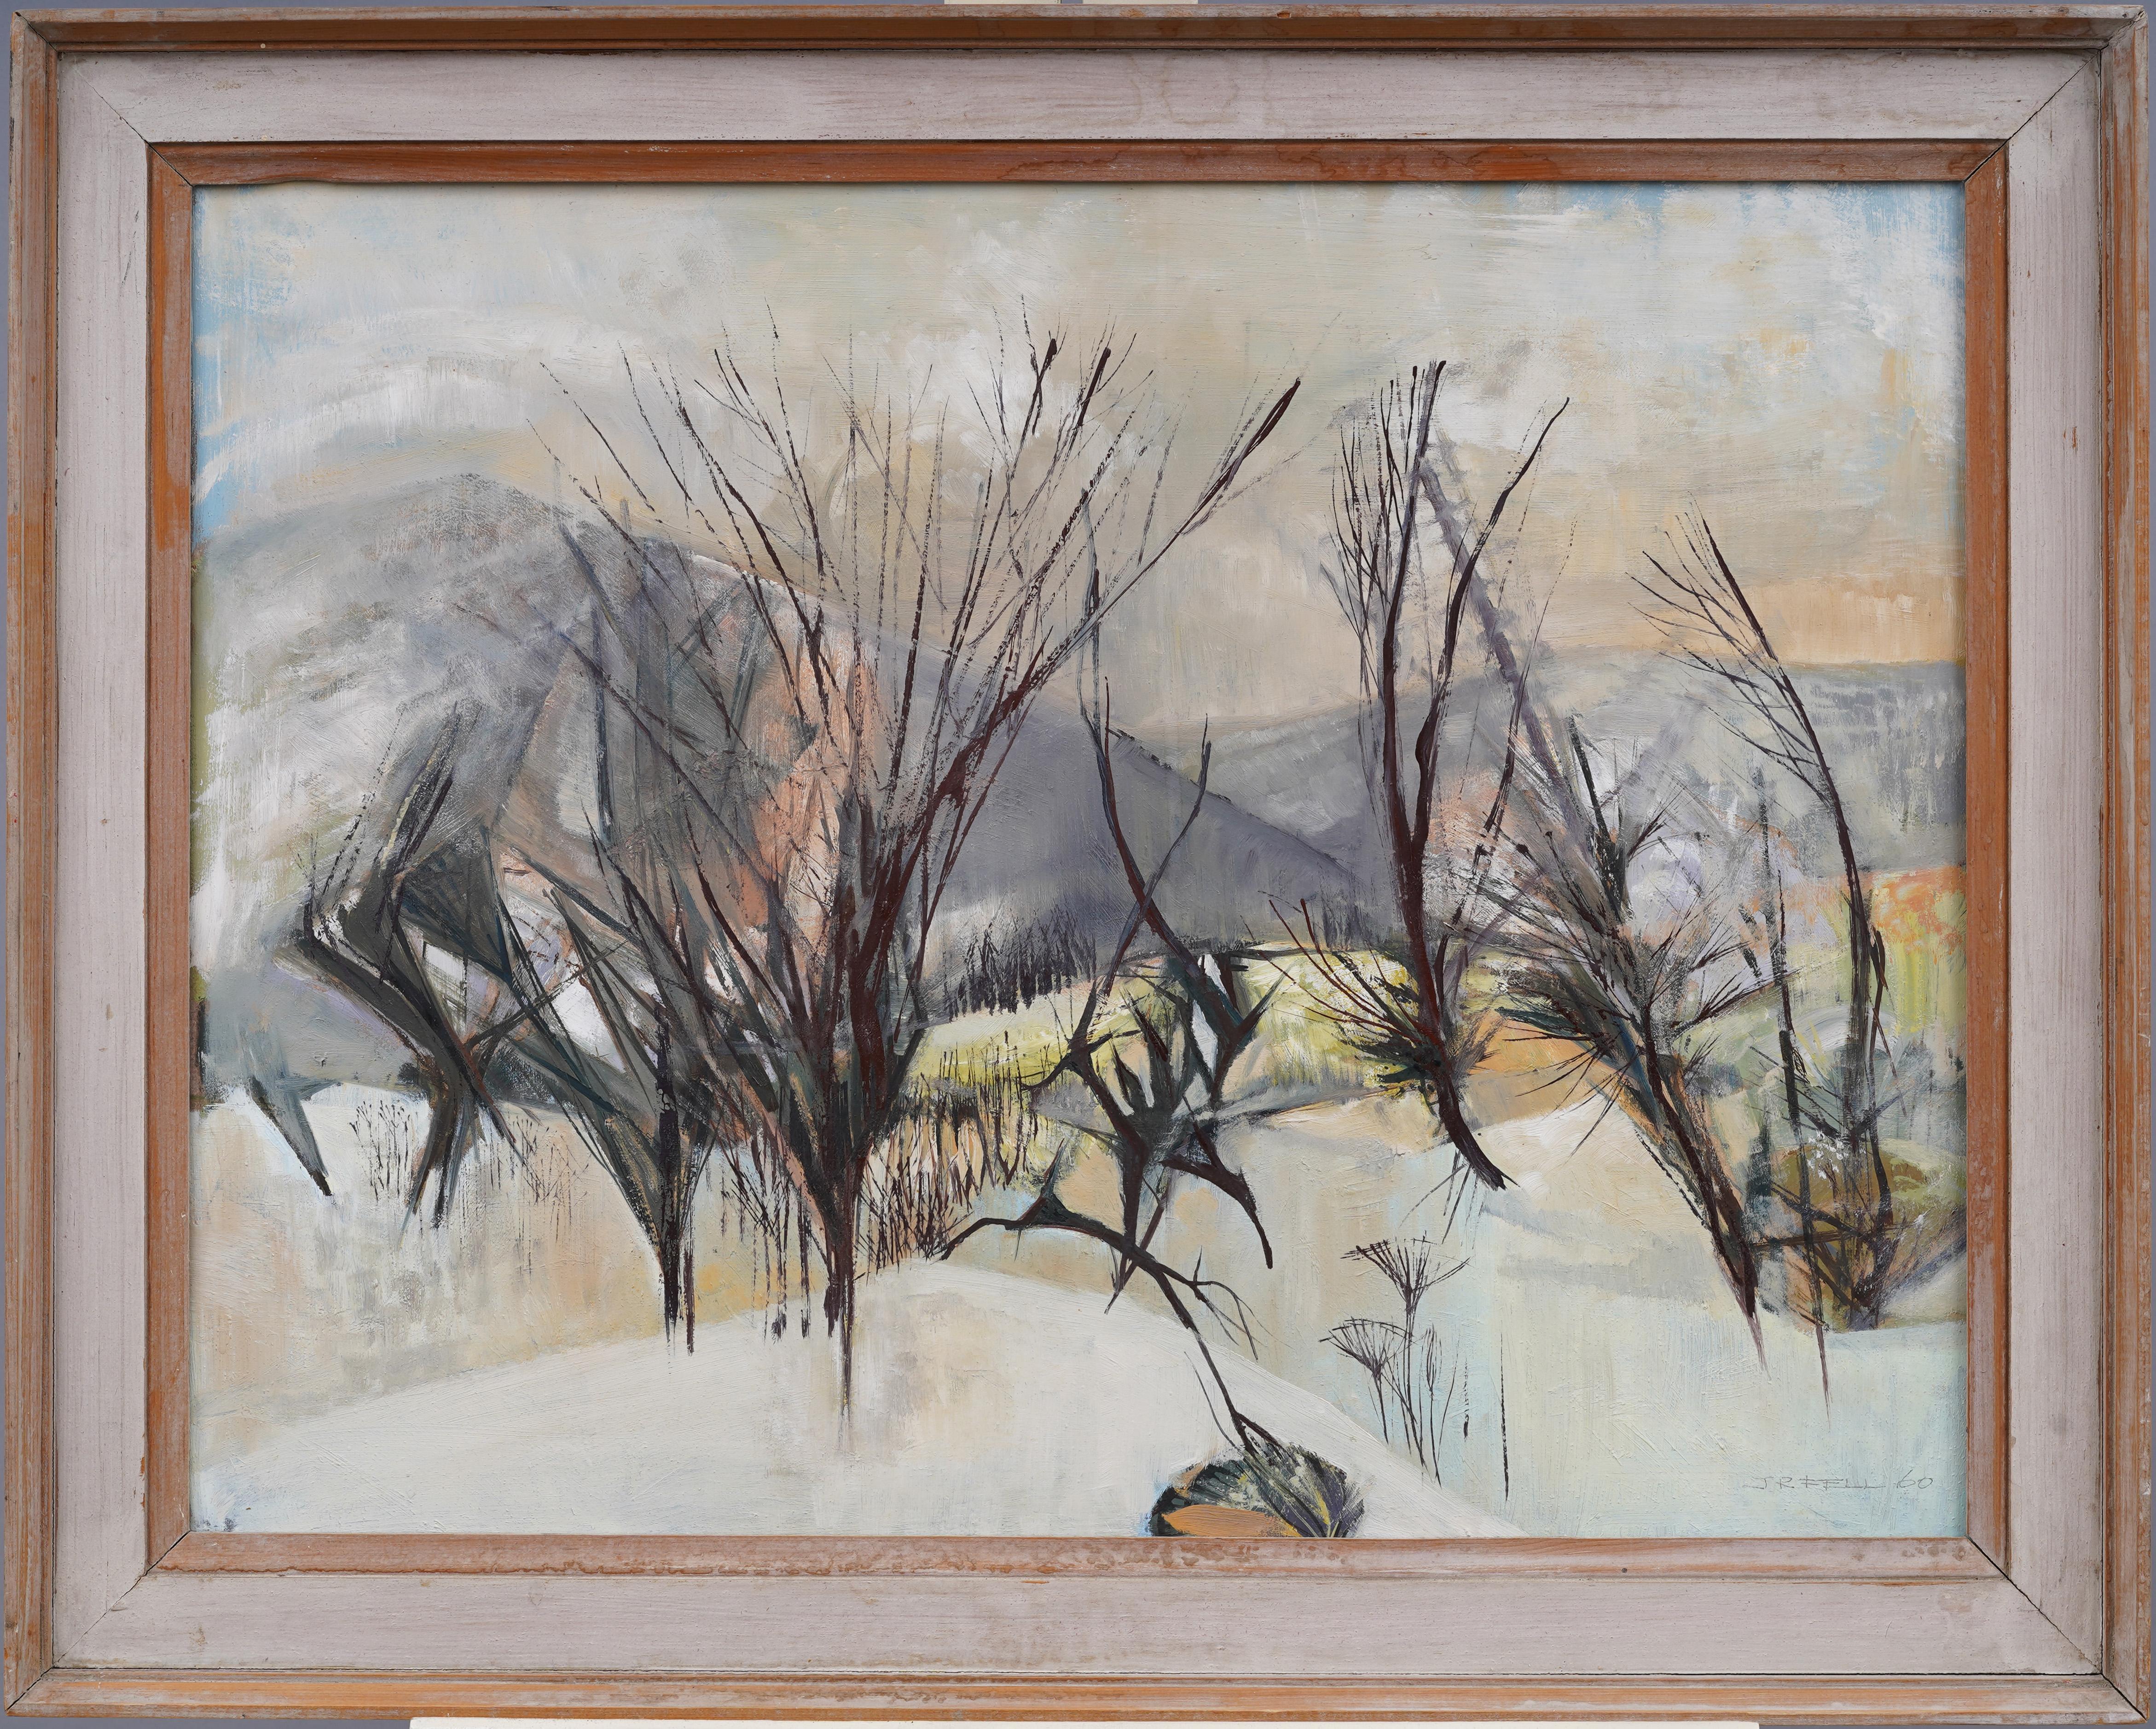 Finely painted bright and brilliant cubist winter landscape.  Framed nicely and signed lower right.  Excellent mid century example. 